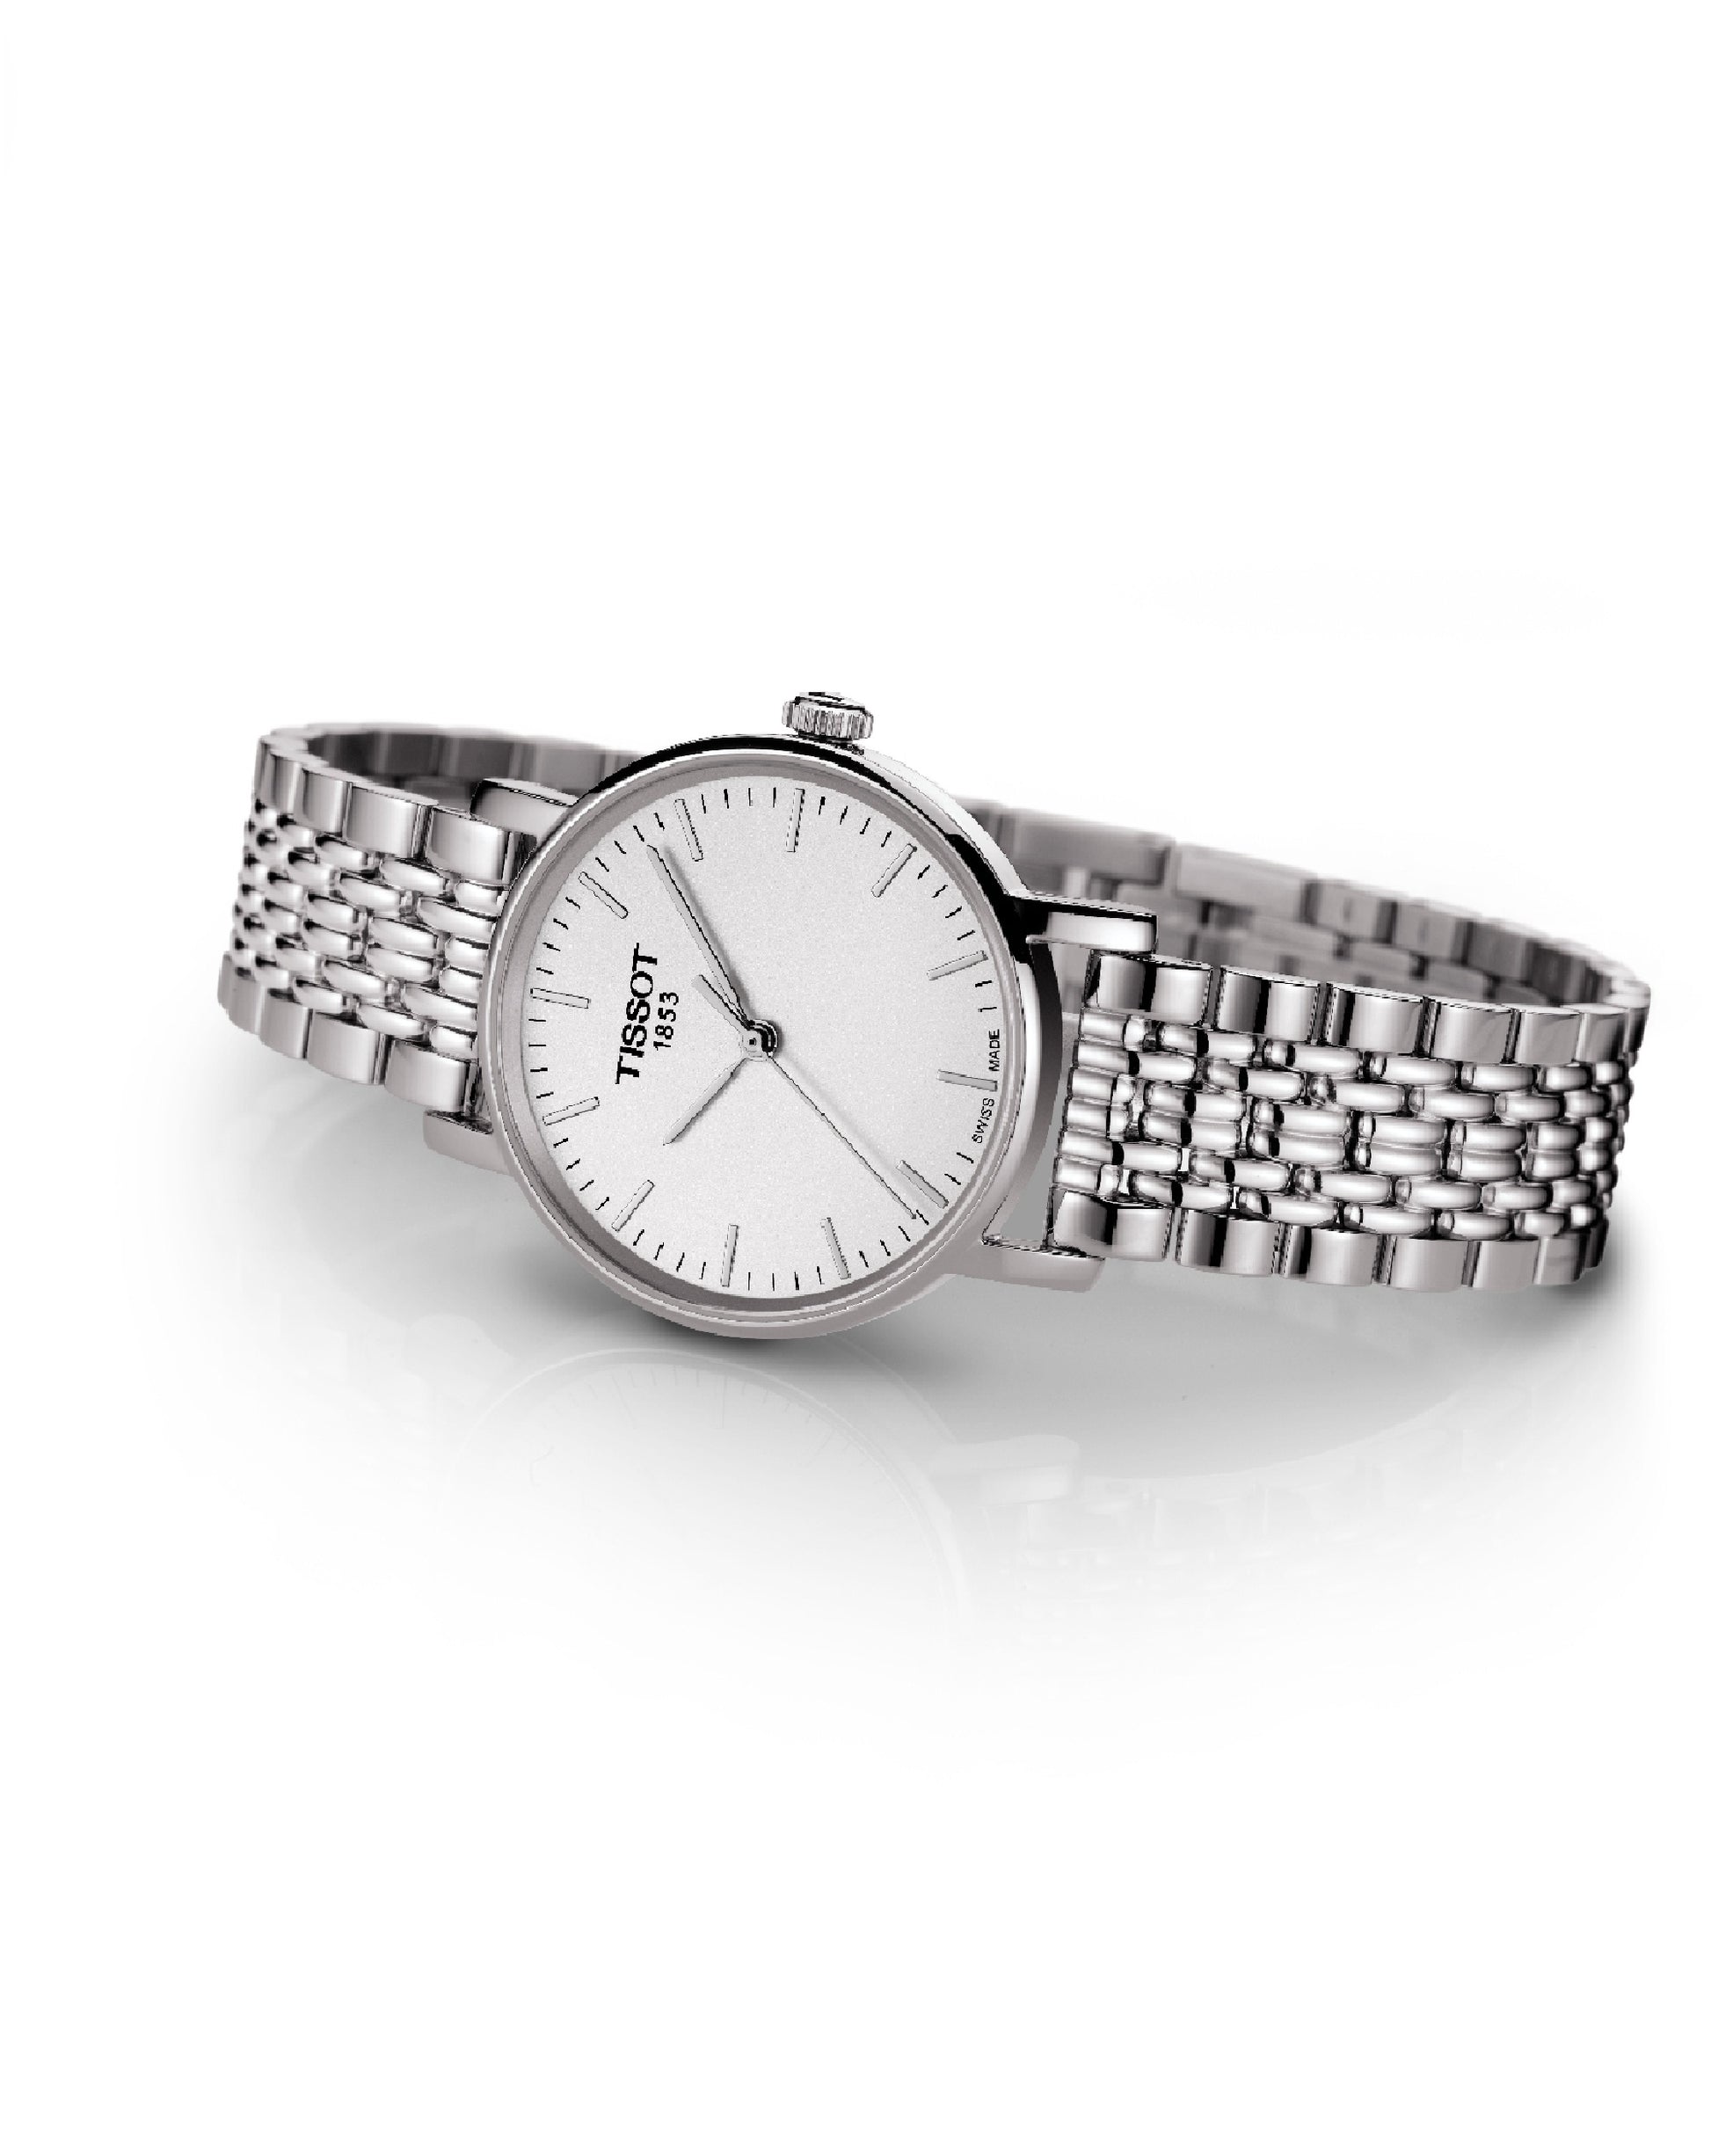 Tissot T109.210.11.031.00 Tissot EVERYTIME Small SILVER Dial Watch